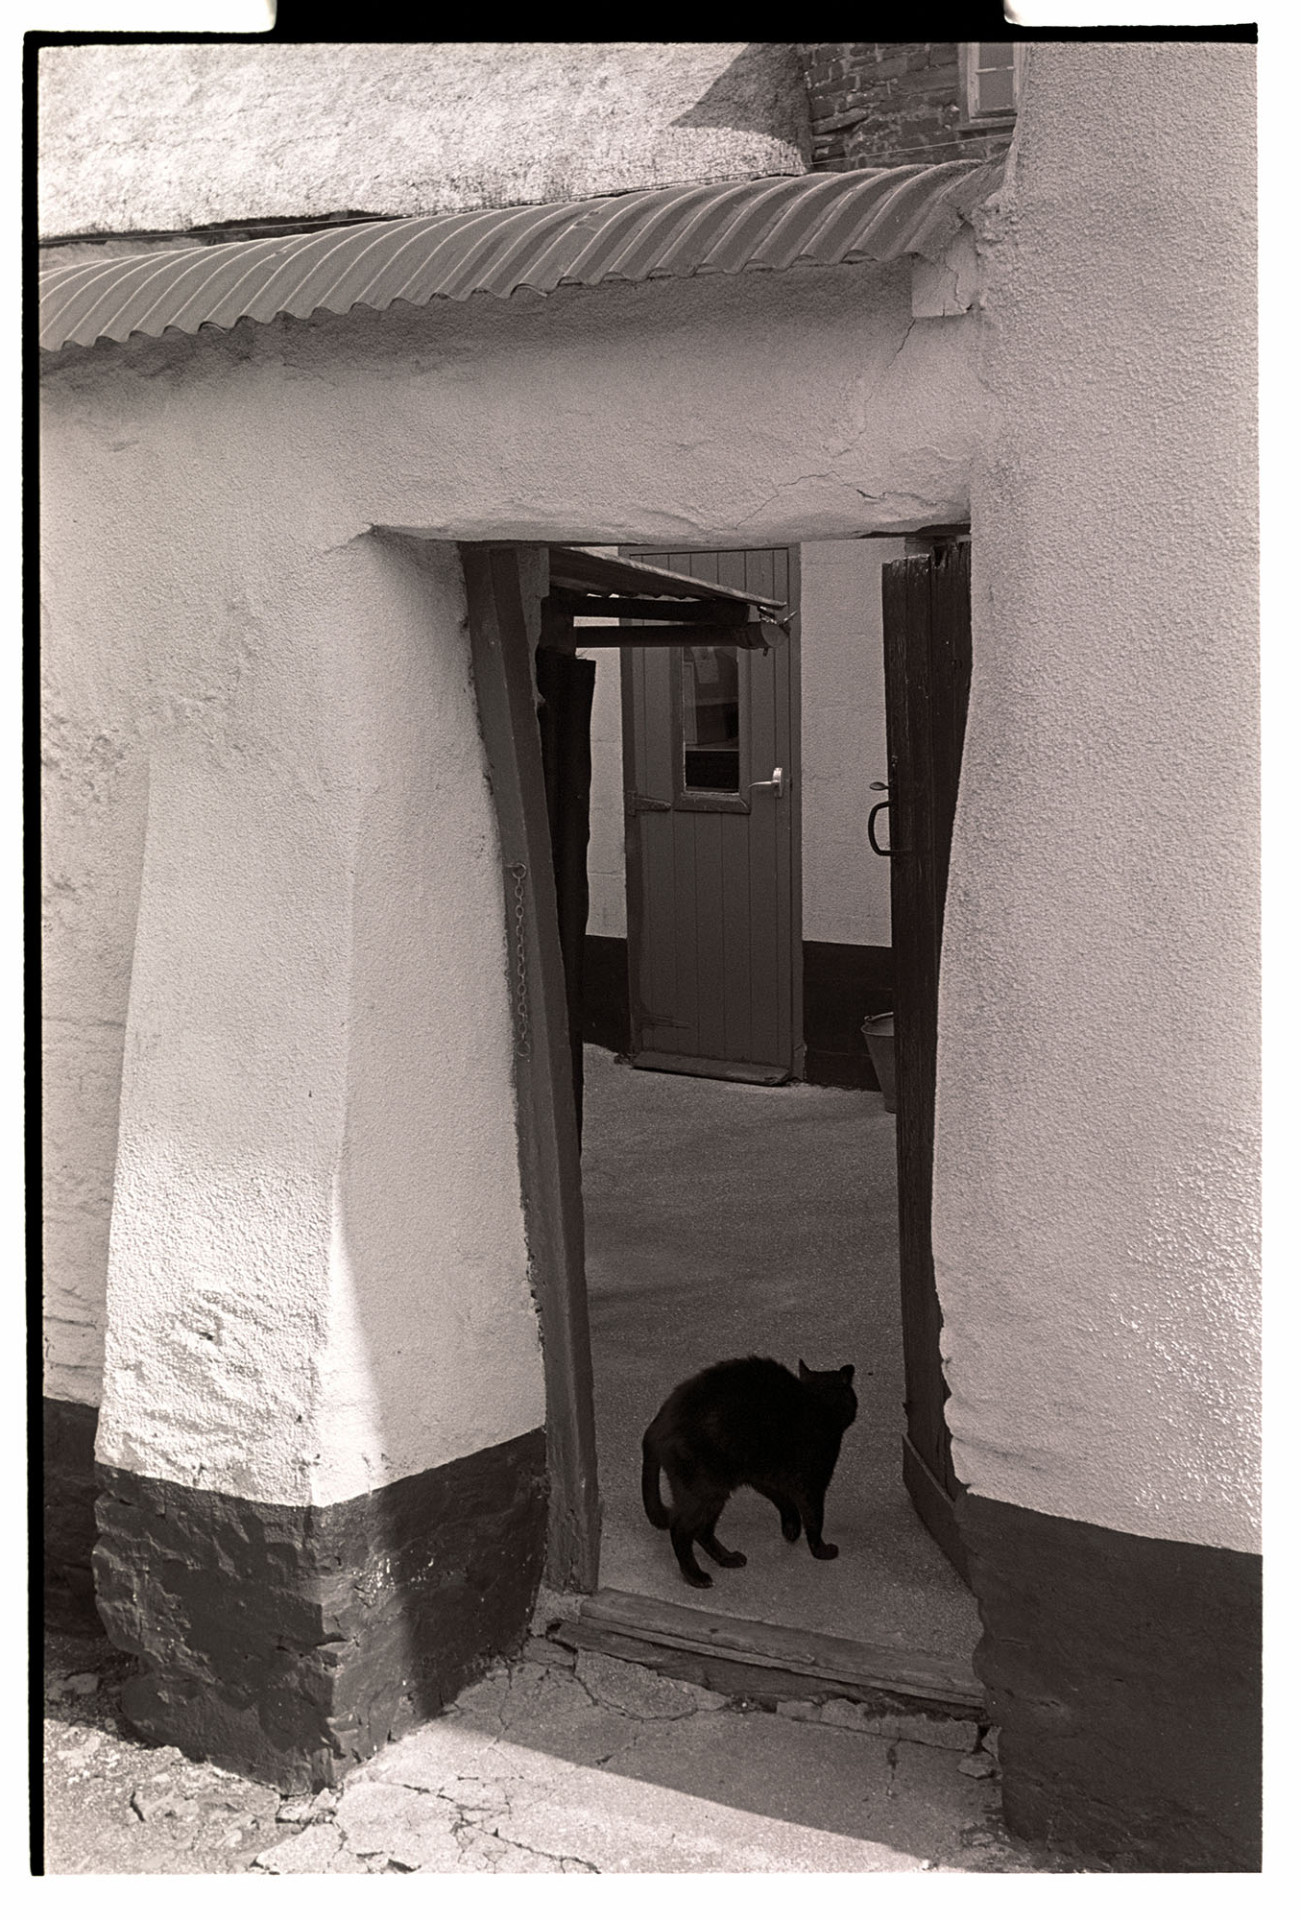 Doorway in cob wall, with cat stretching. 
[A cat stretching in the open doorway of a cob wall at The Cott, New Street, Chulmleigh.]